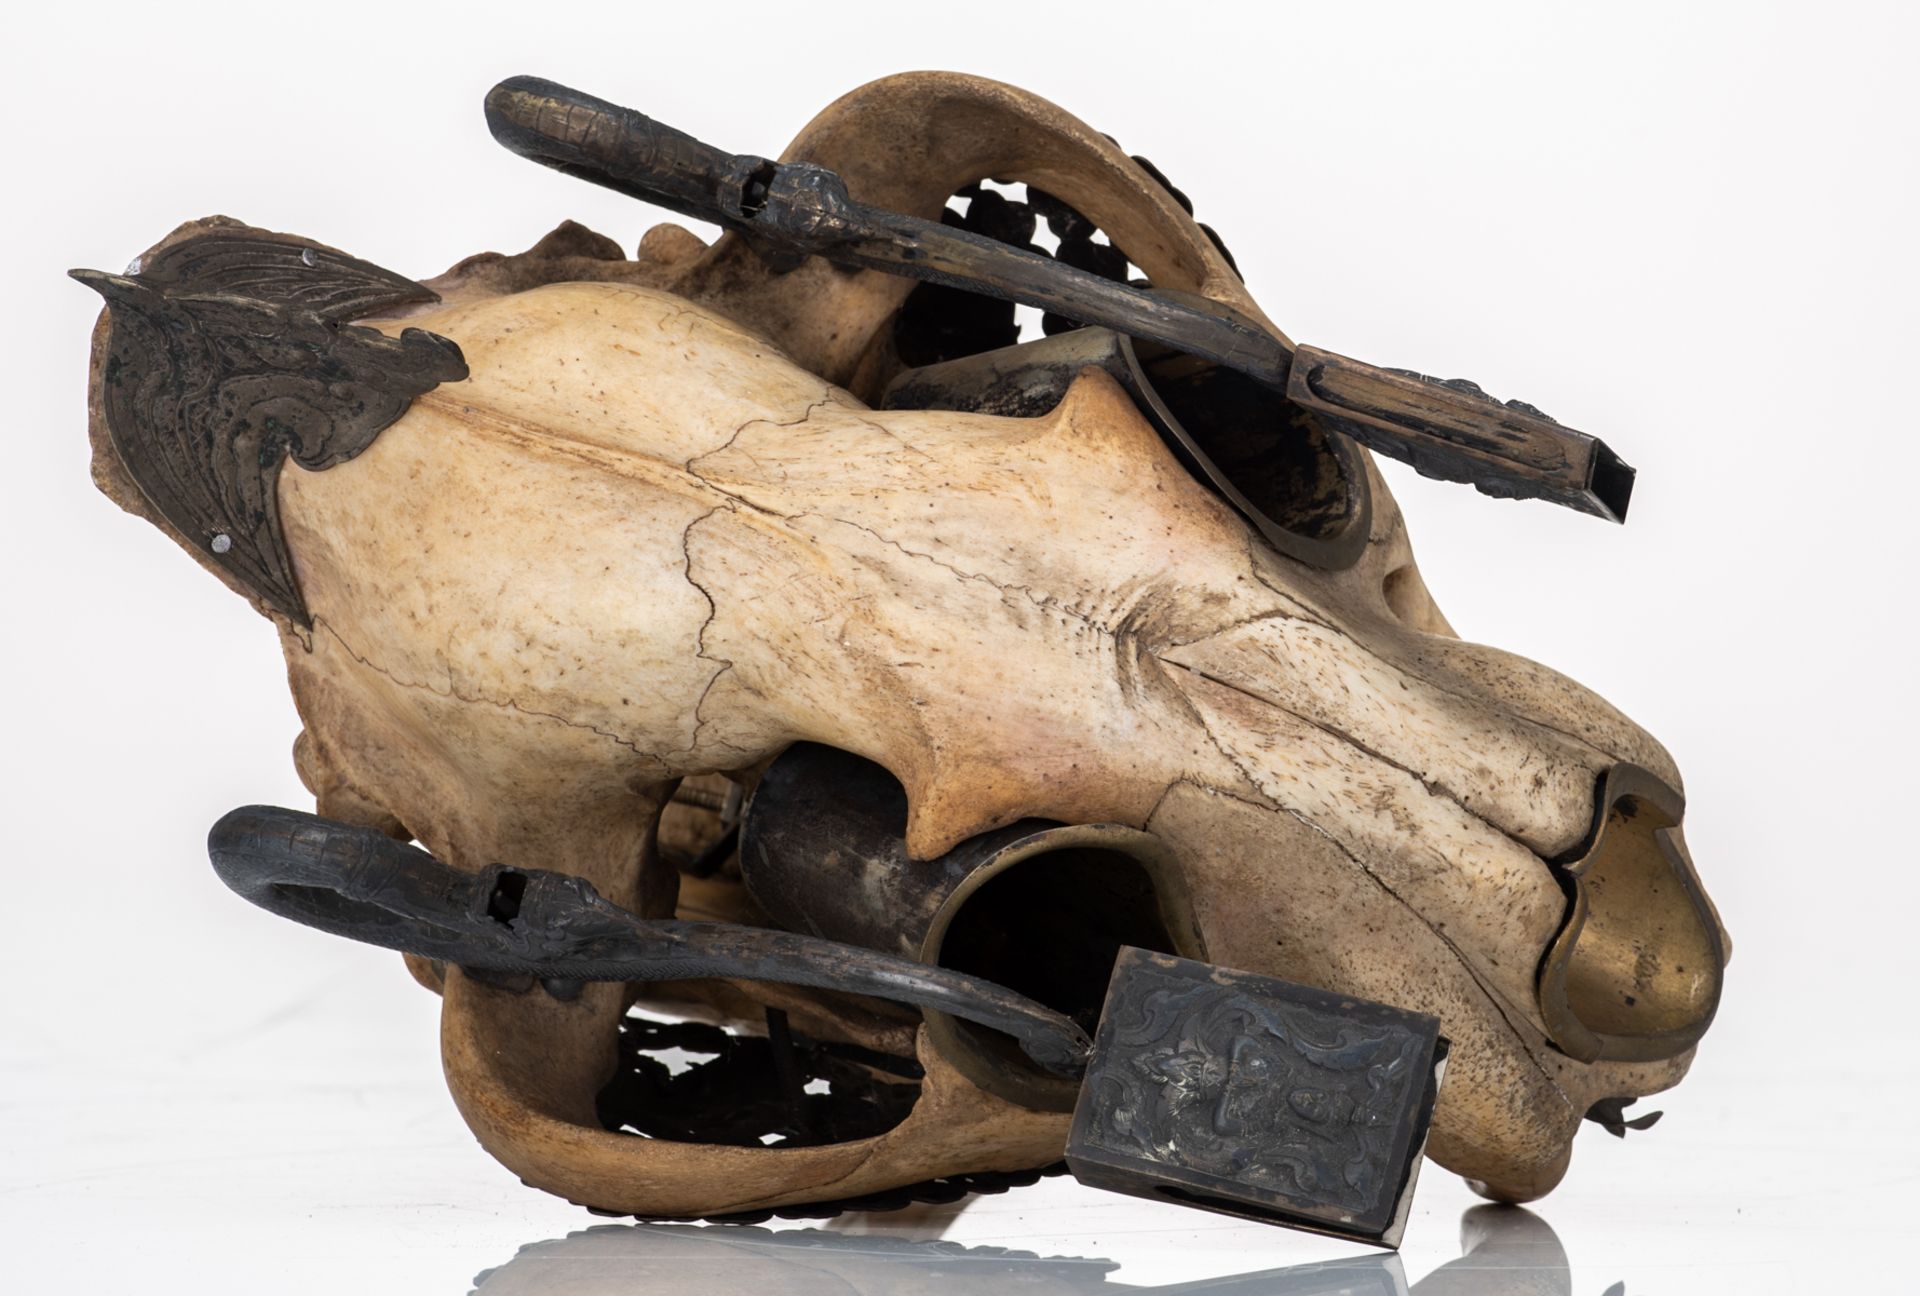 The skull of a Bengal tiger as a bizarre hunting trophy transformed into smokers gear with silver mo - Image 8 of 9